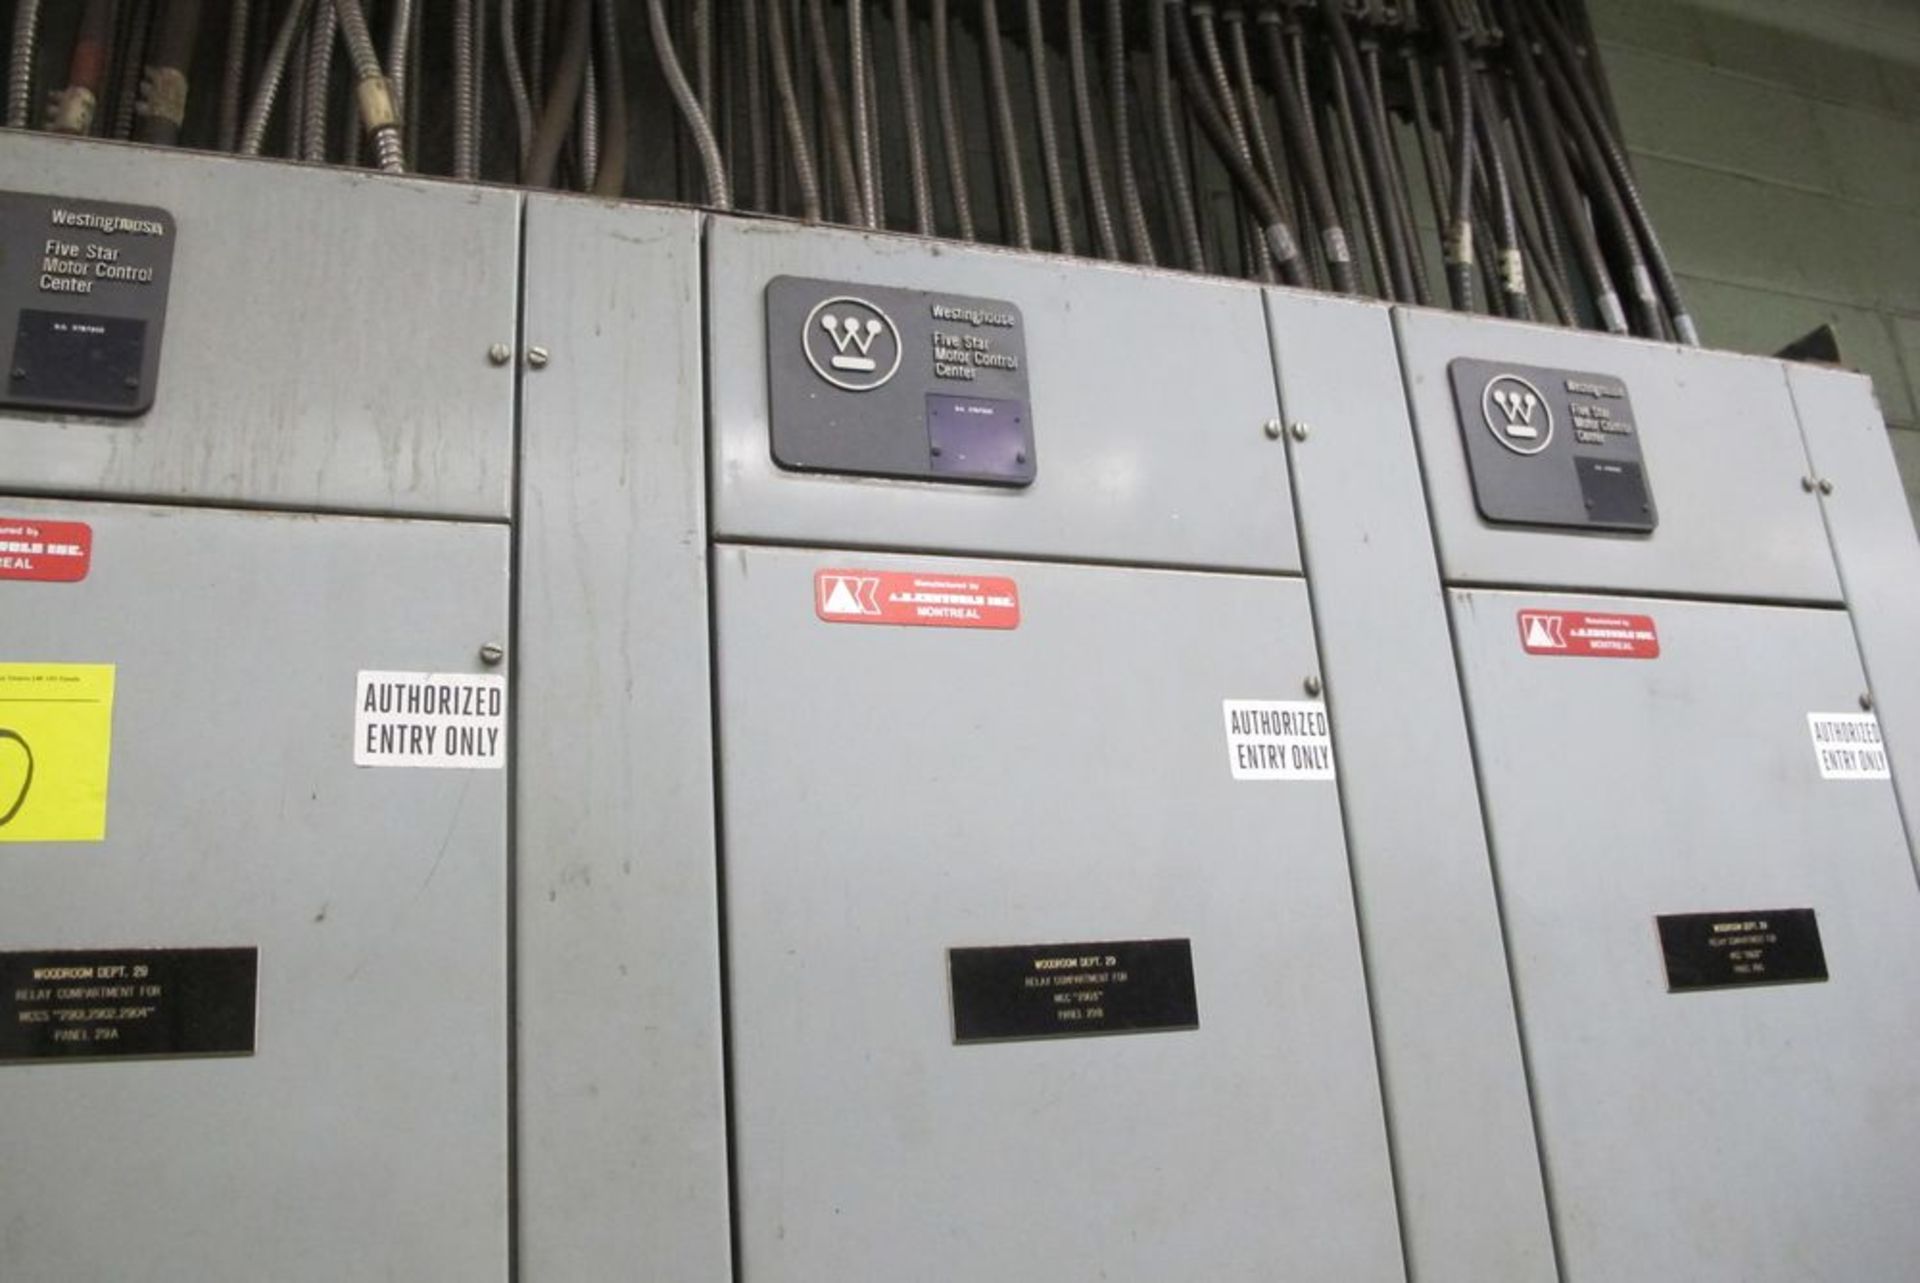 WESTINGHOUSE 5 STASR MCC (CUT WIRE 6" FROM TOP OF PANEL) (WOOD BLDG 29 - 1ST FL SUBSTATION) - Image 2 of 2